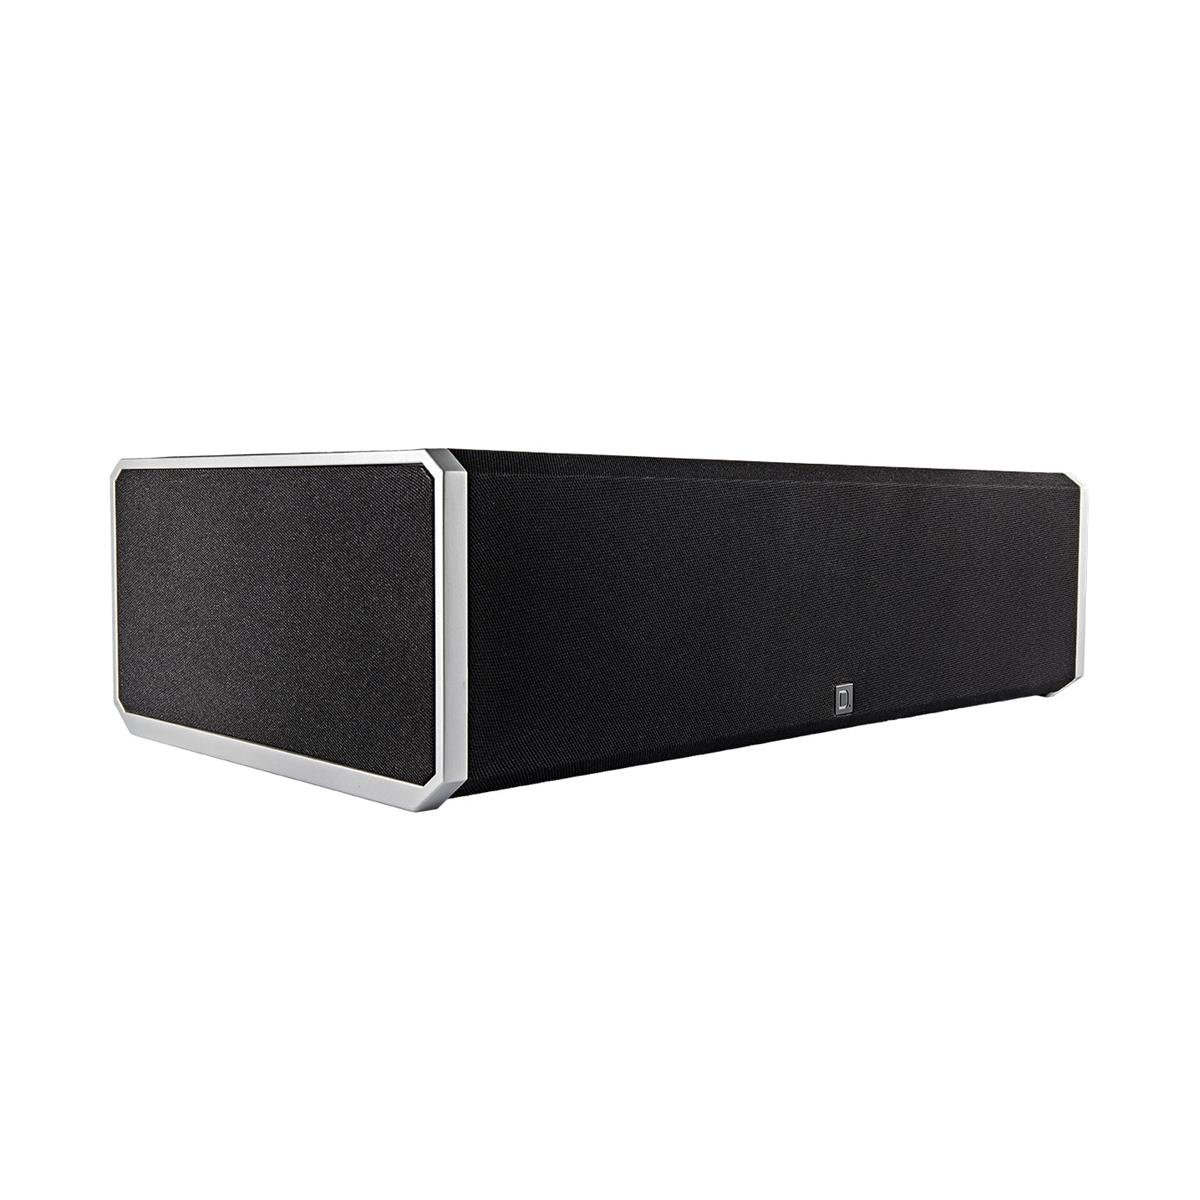 Definitive Technology CS9060 High-Performance Center Channel Speaker - Ooberpad India